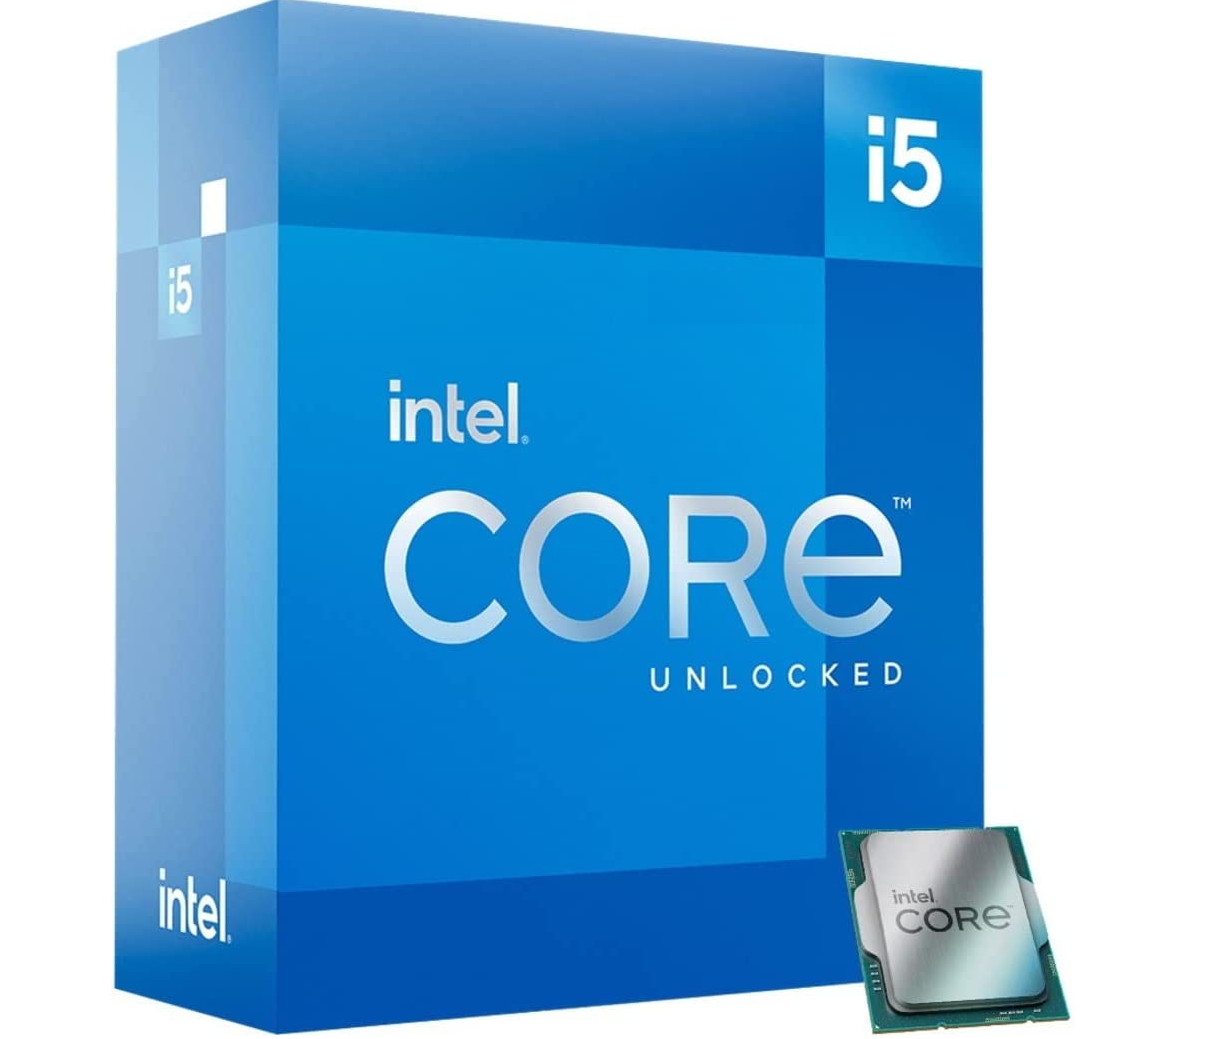 Intel Core I5-13600K Review - A Punch Above Its Weight –